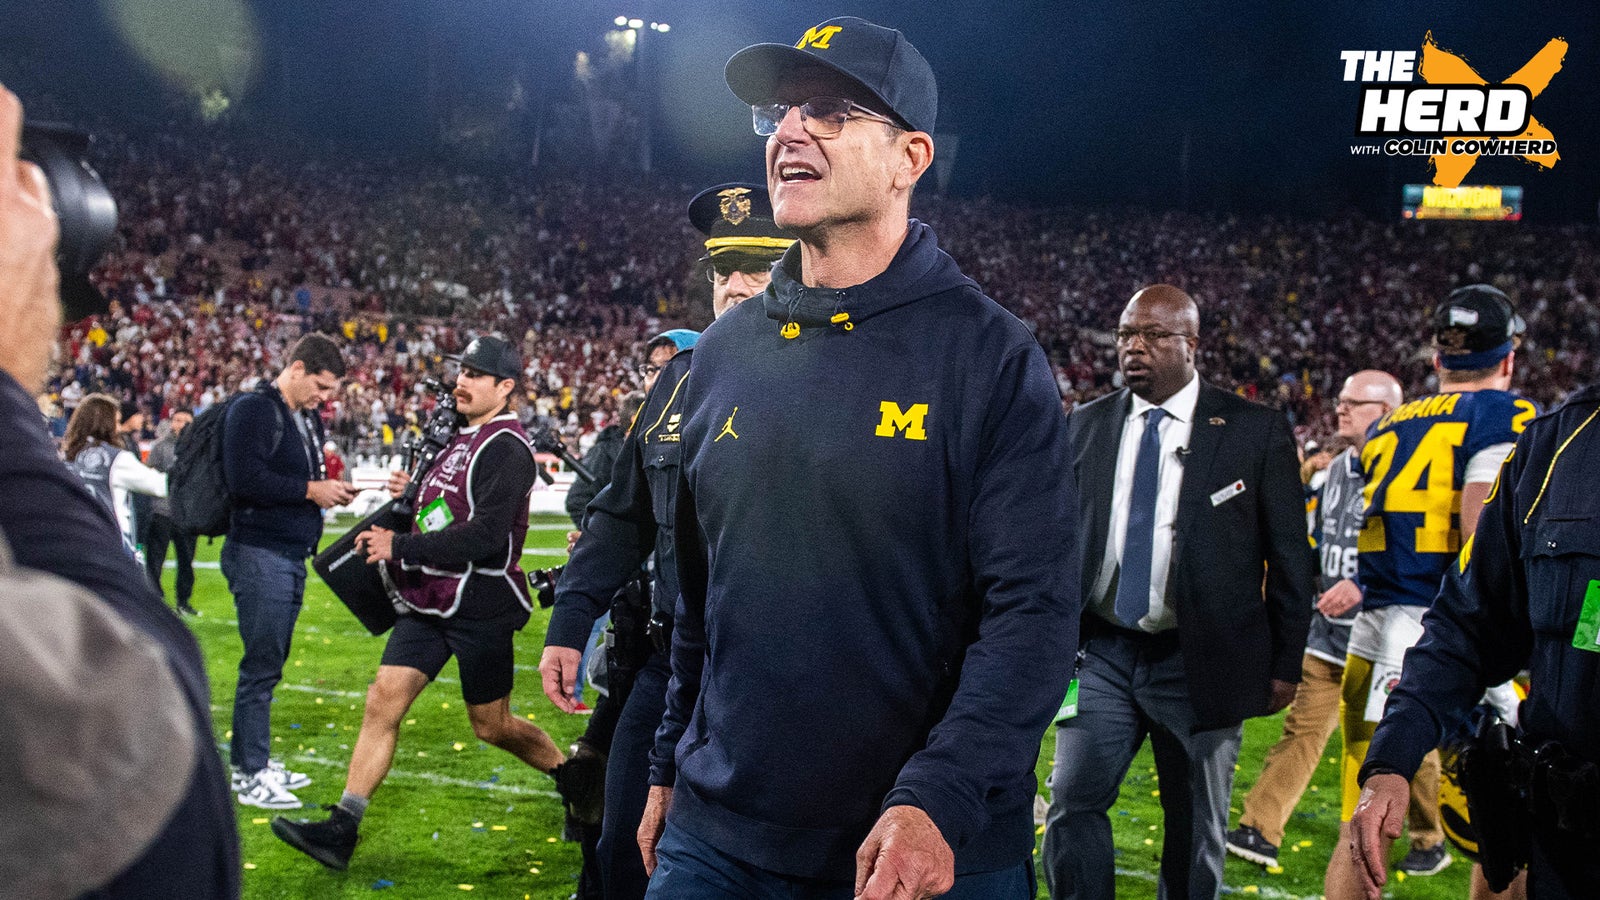 Would the NFL be a better spot for Jim Harbaugh?